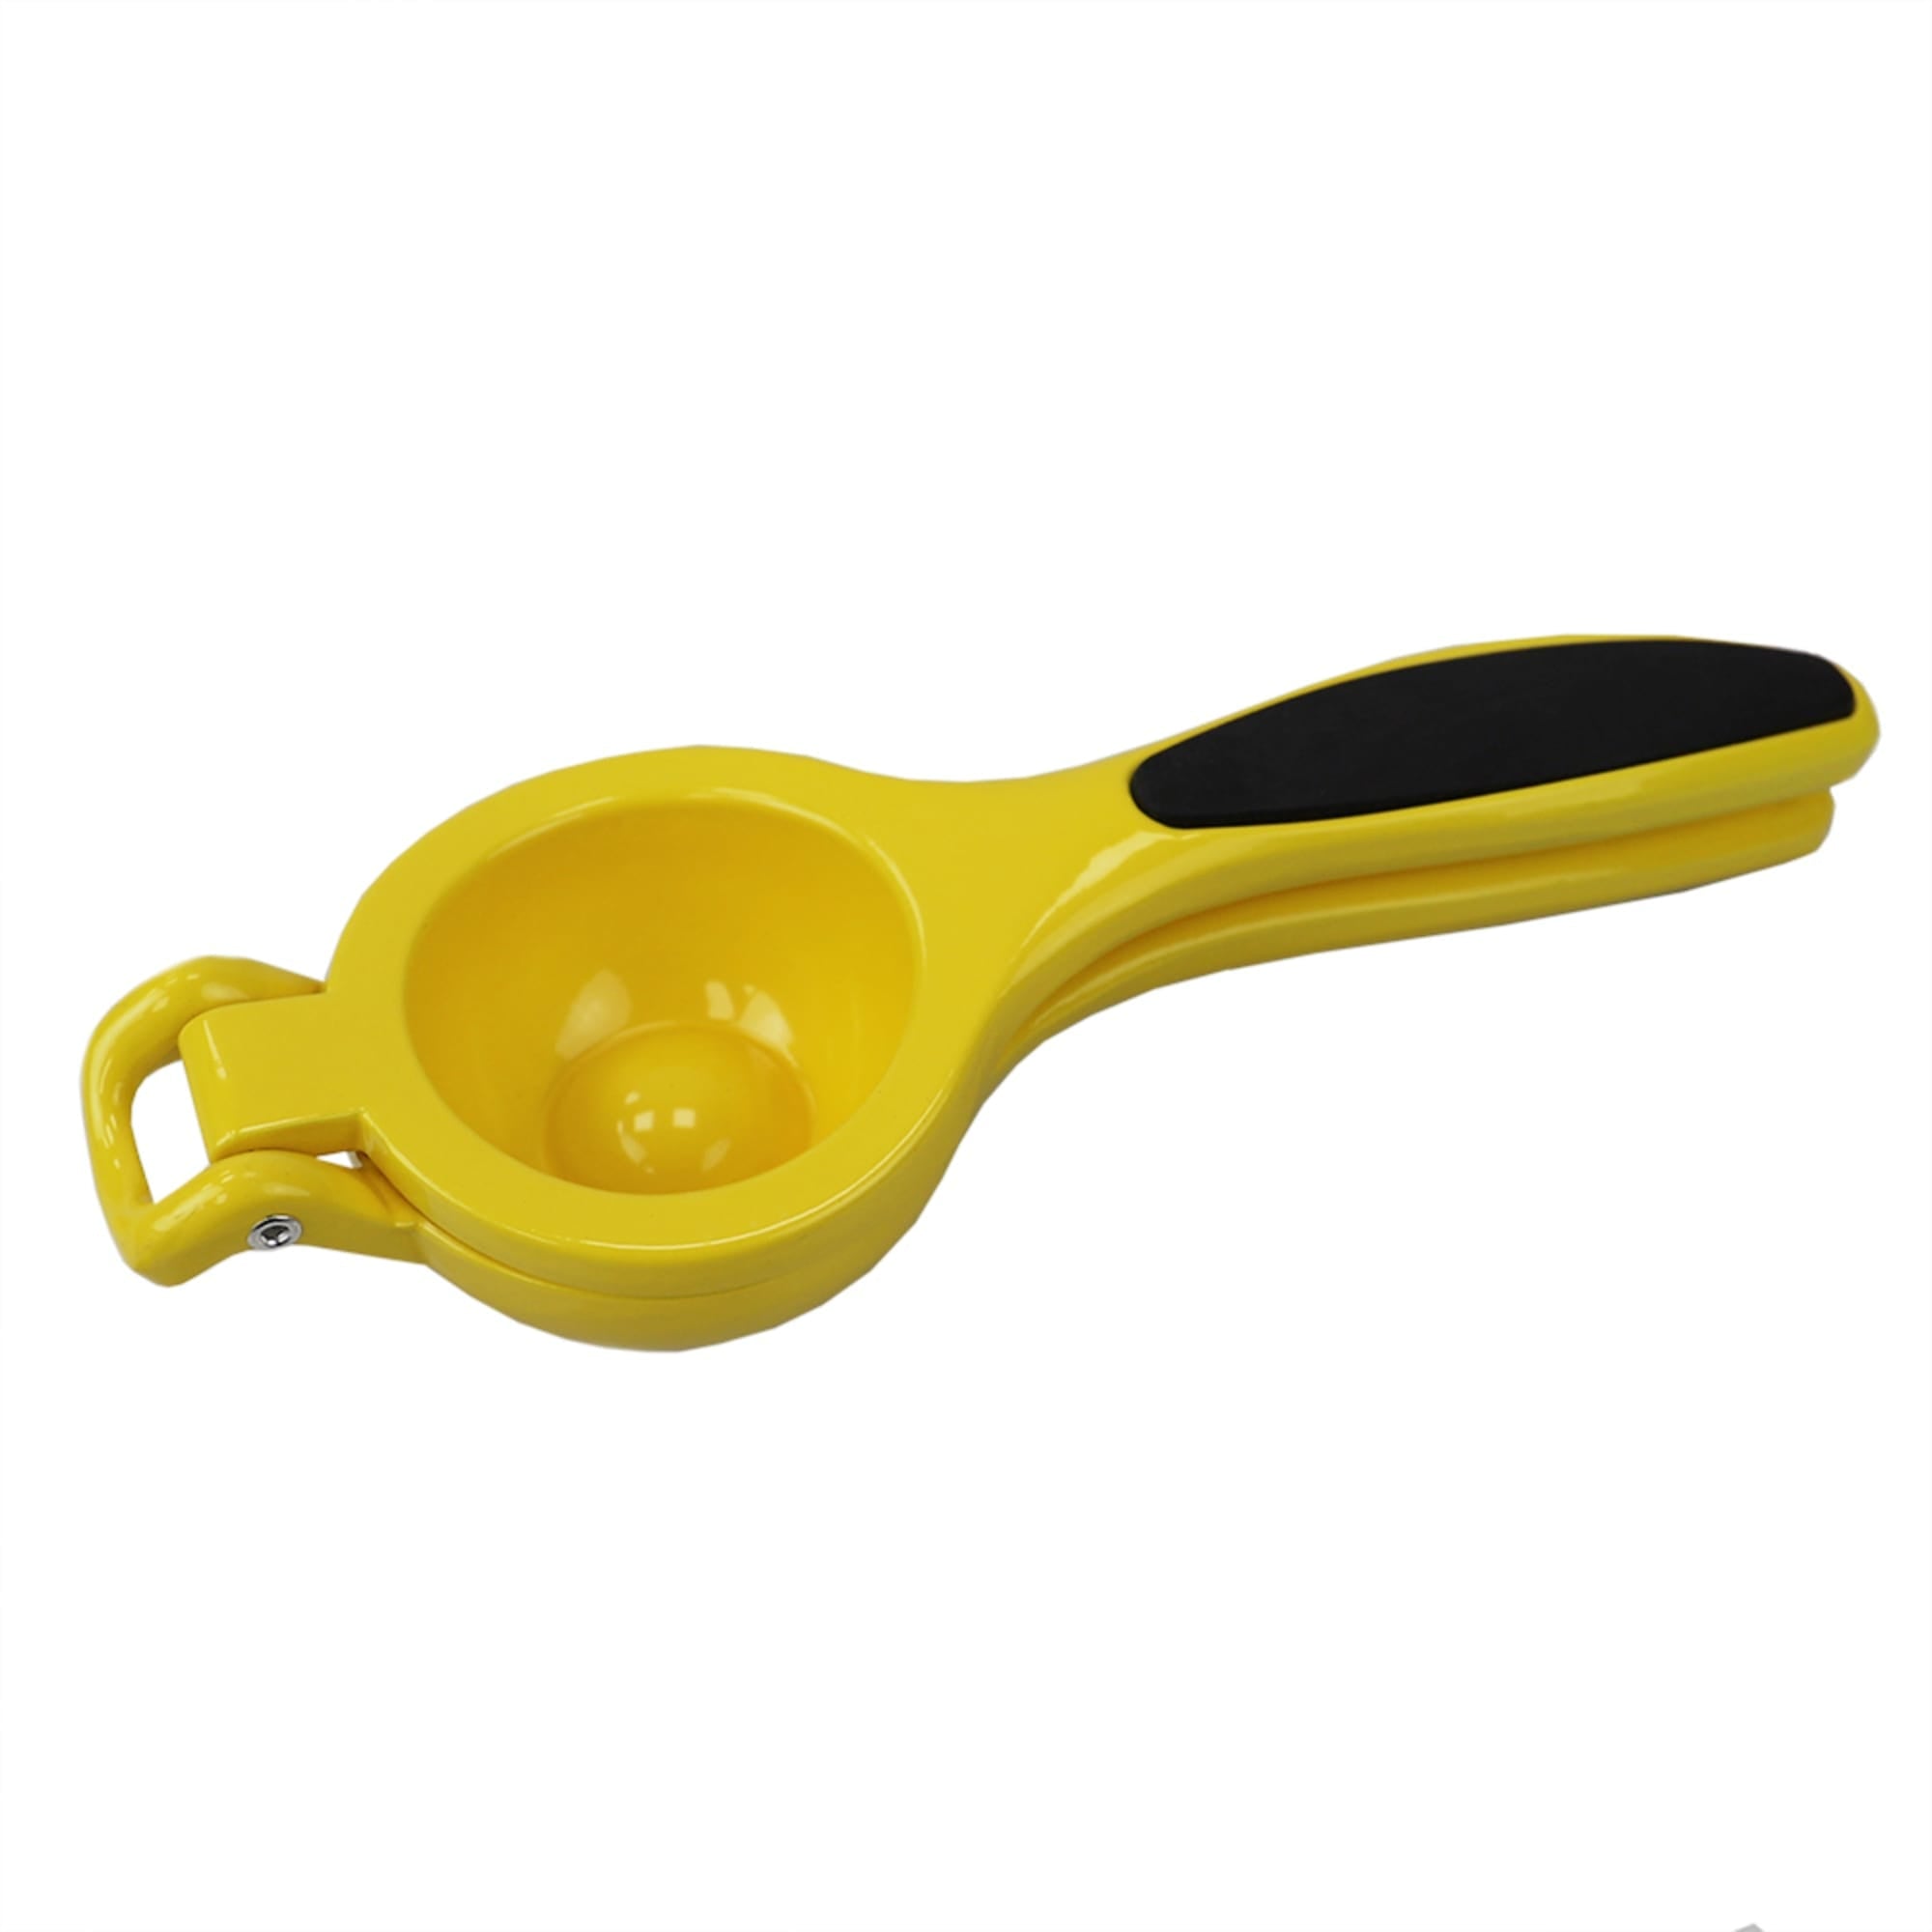 Home Basics Enamel Steel Lemon Squeezer with Grip Handle, Yellow $5.00 EACH, CASE PACK OF 24